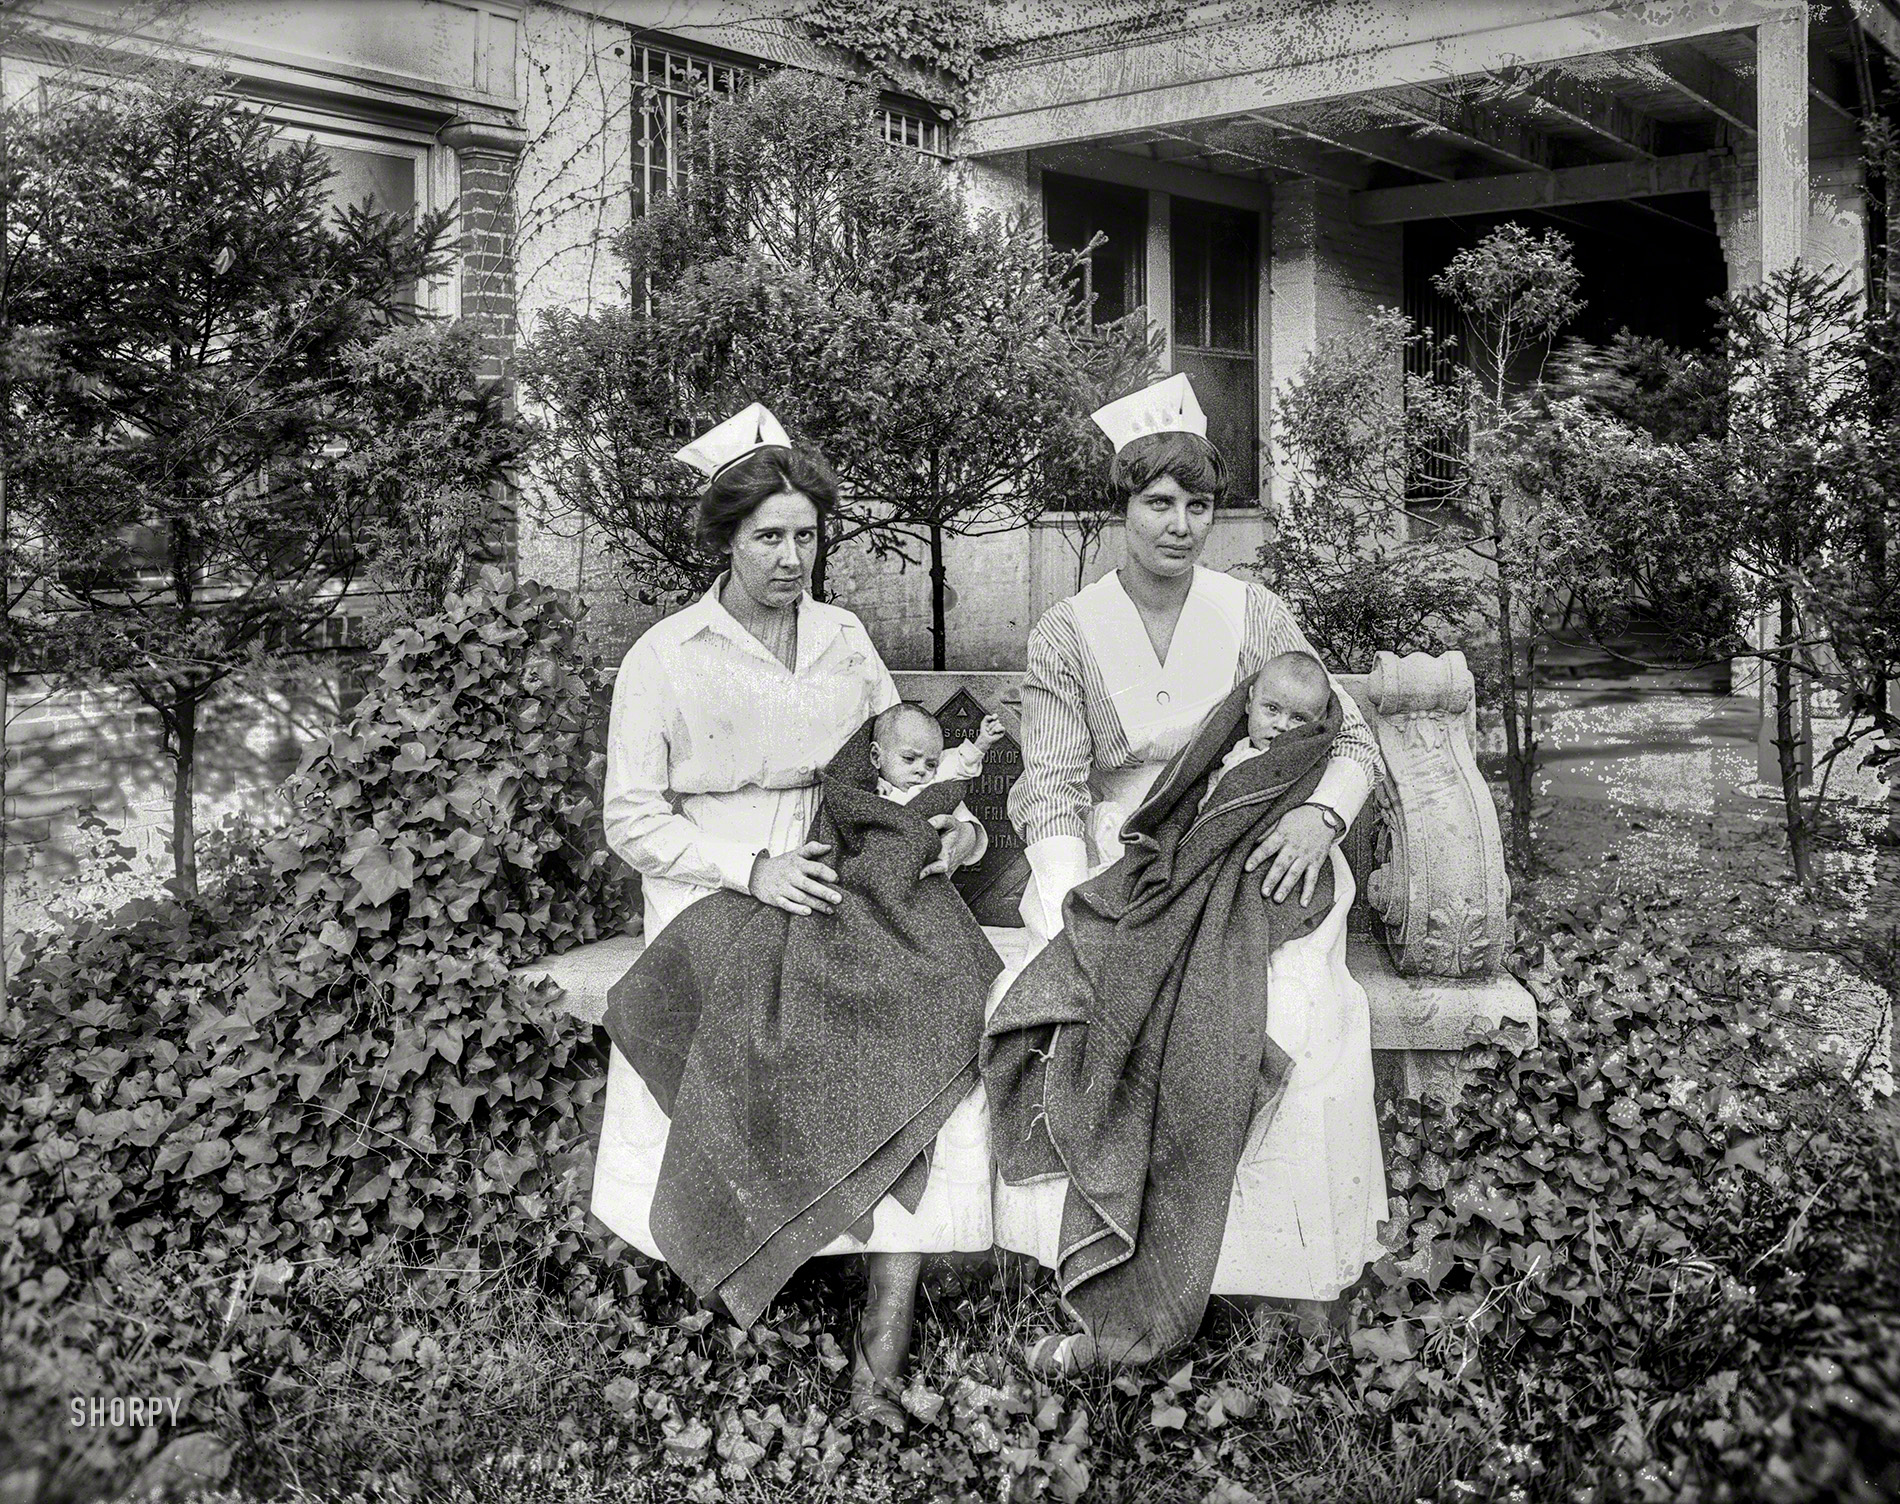 Washington, D.C., circa 1919. "Children's Hospital." ("Nurse, the doctor said they need I.V.'s") National Photo Company Collection glass negative. View full size.